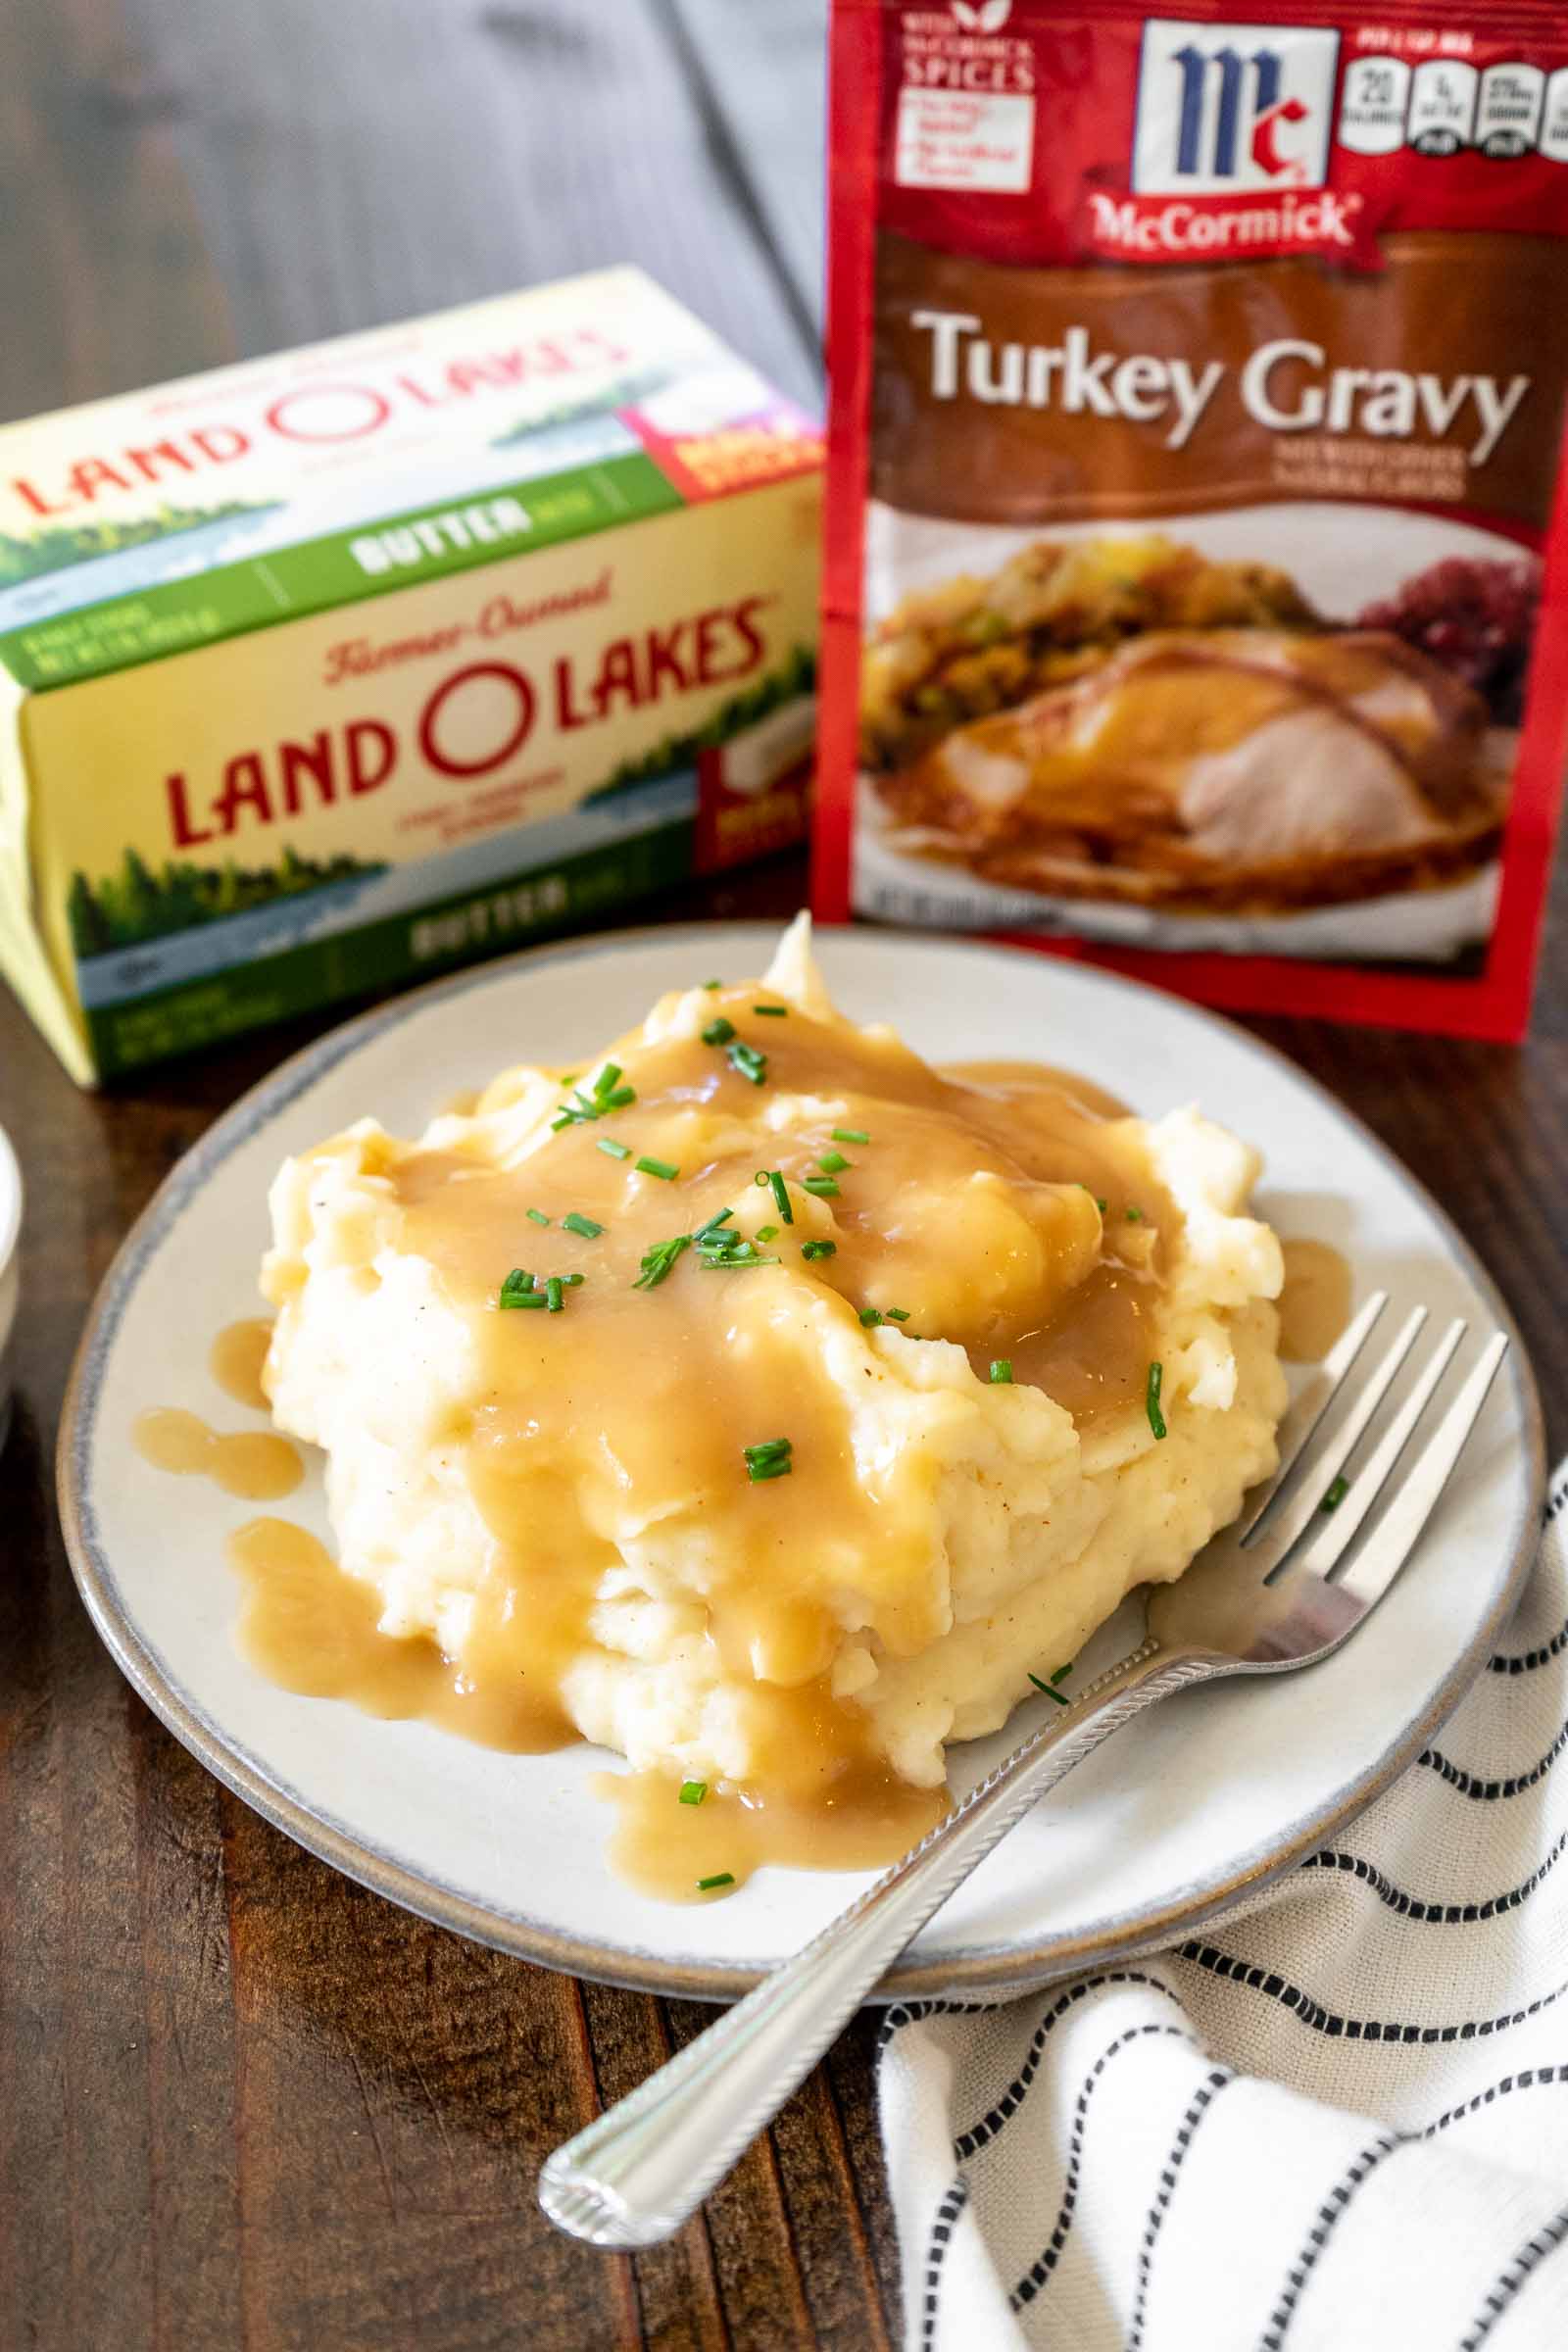 A plate of mashed potatoes and gravy with Land o Lakes Butter and McCormick Gravy packet